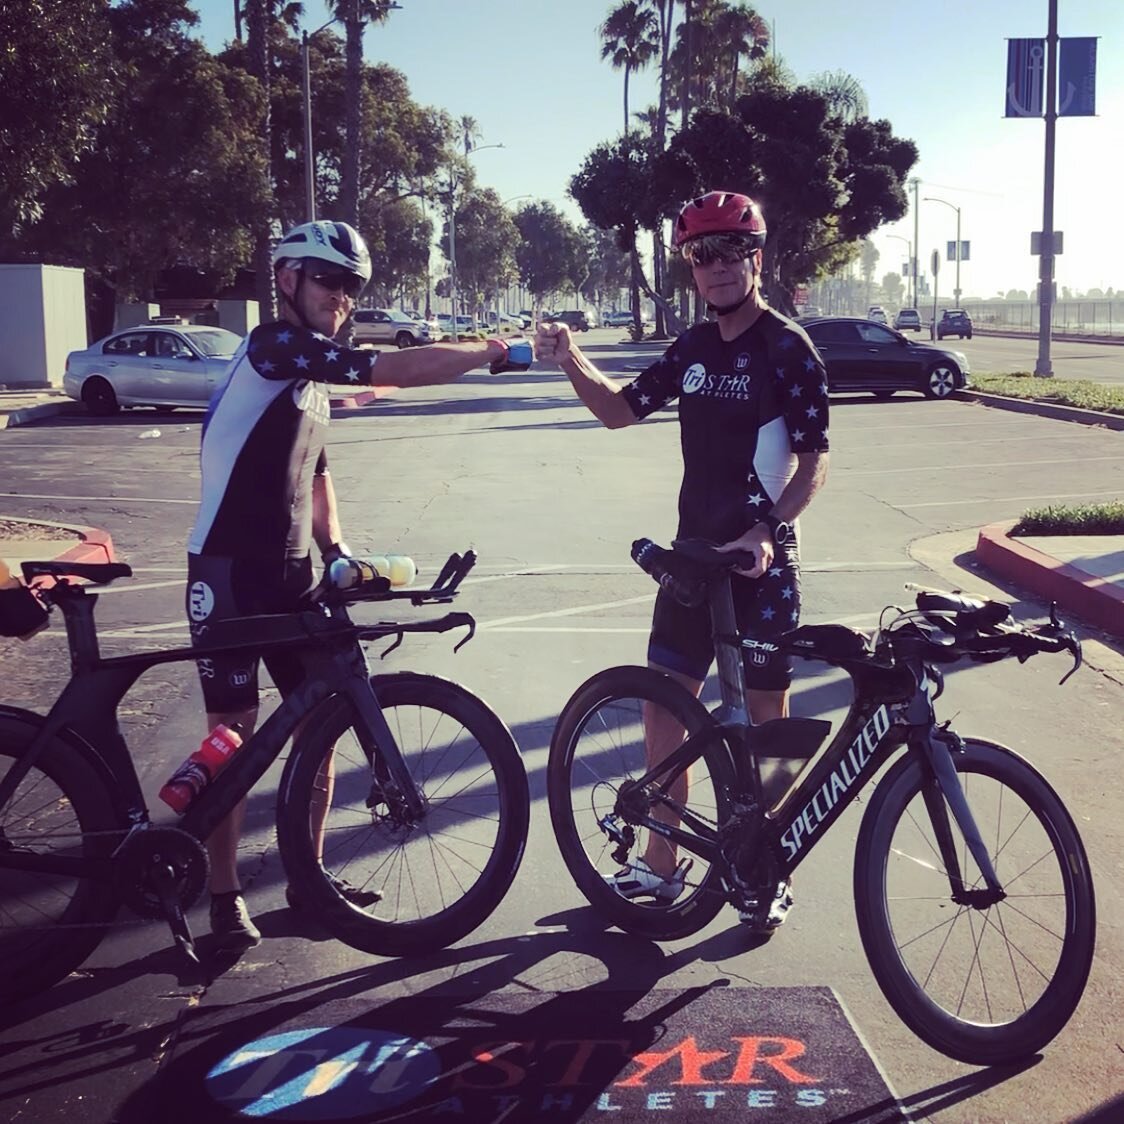 Tristar Athletes Southwest - 70.3 race weekend is underway! Chris Graves and Bryan Schleppy team up. @trihardcg @8schlep8 #tristarathletes #Tristarvr